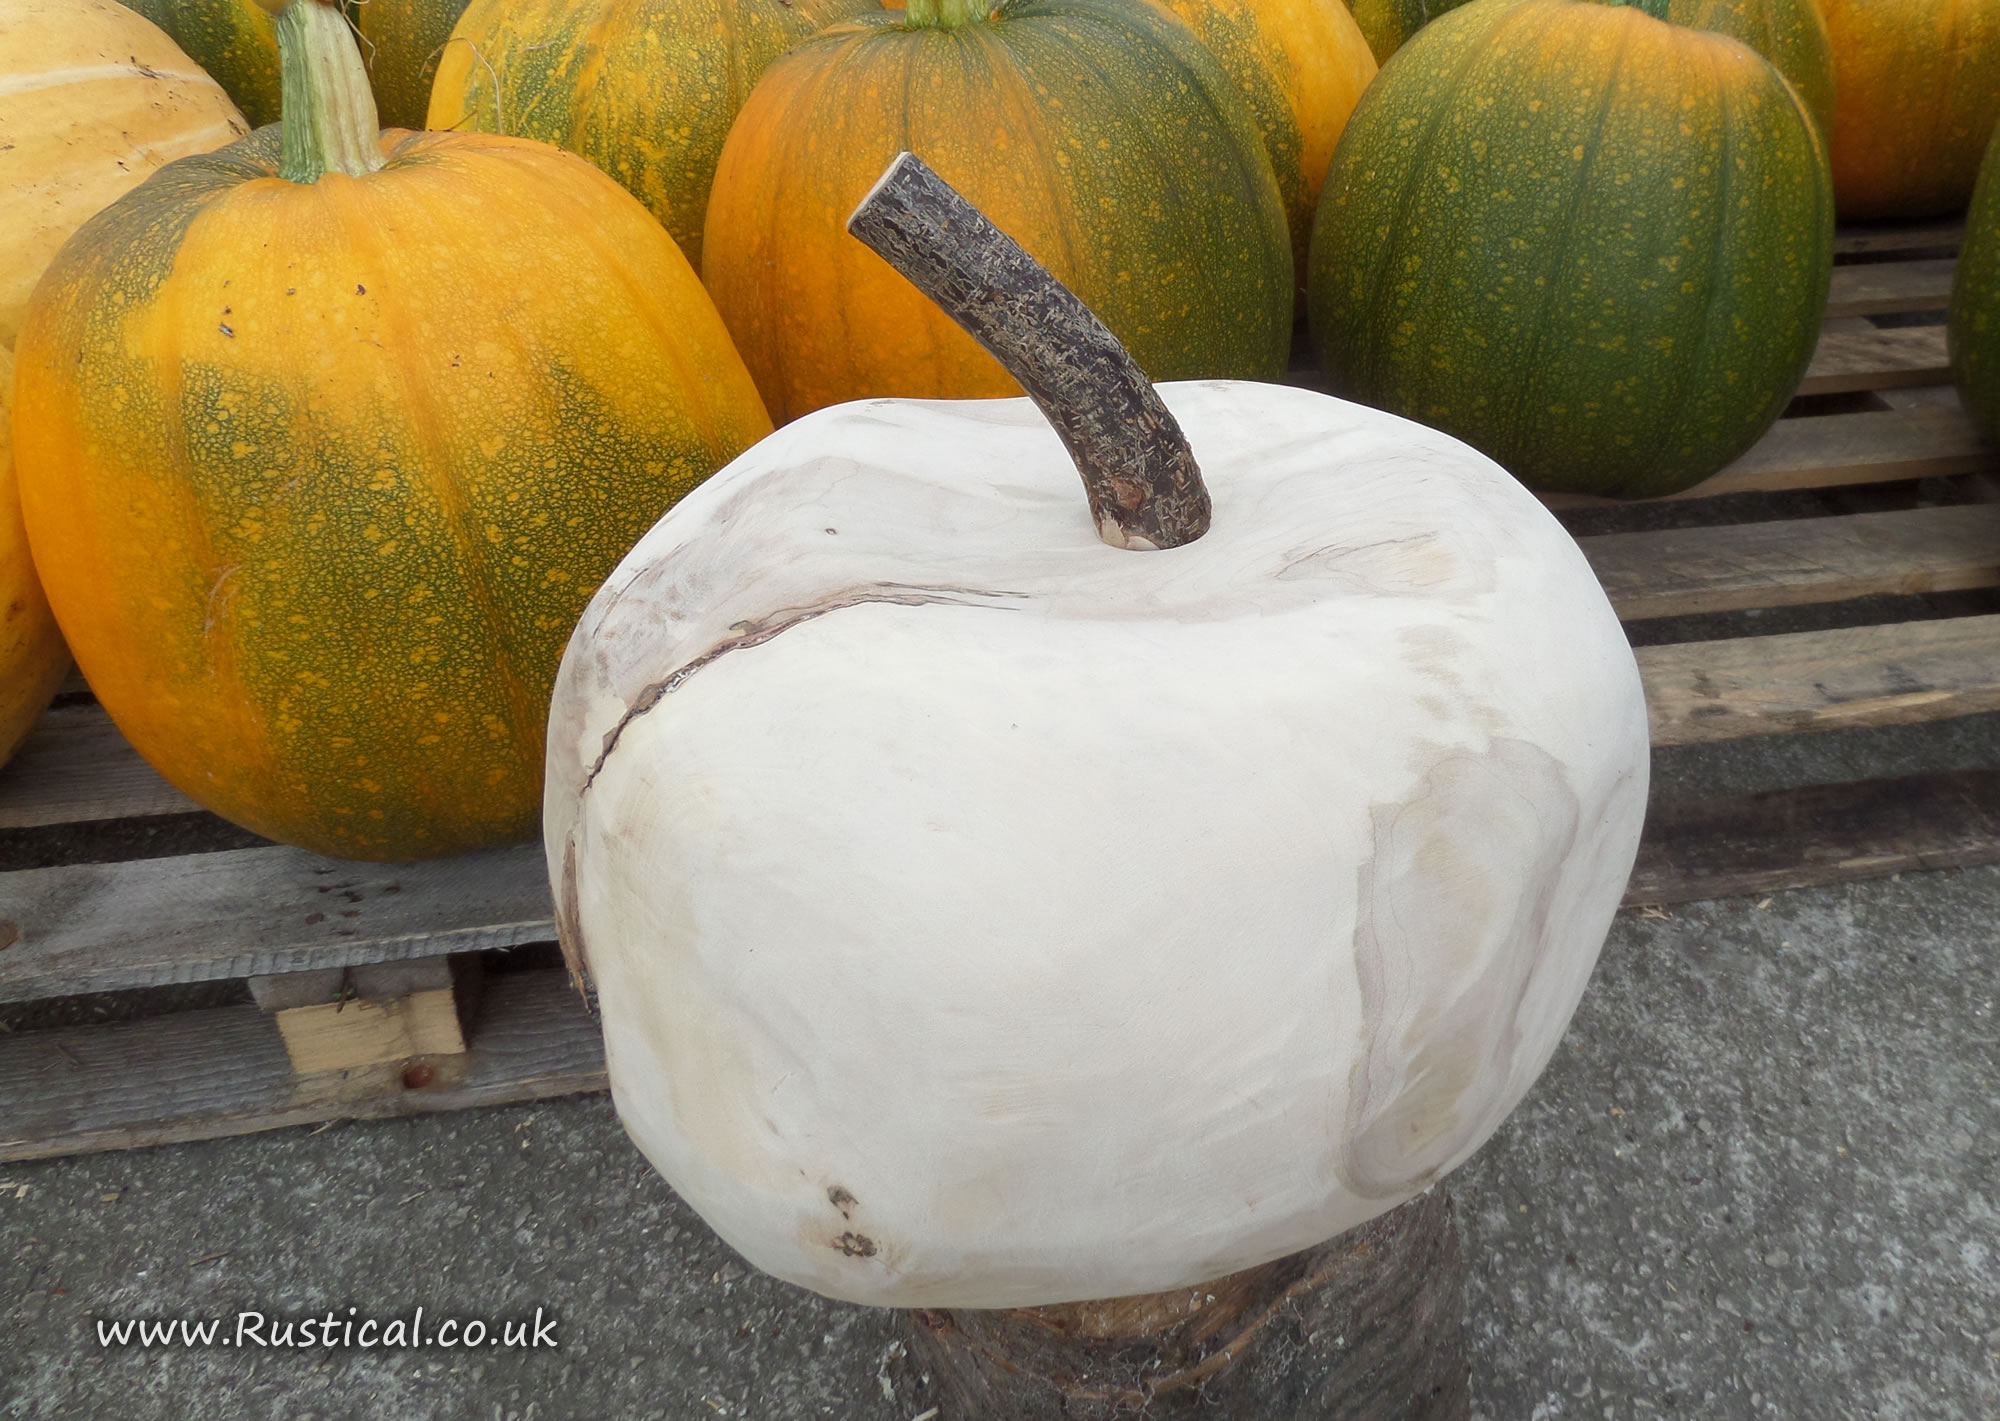 The roughed out Sycamore pumpkin together with a hazel stalk